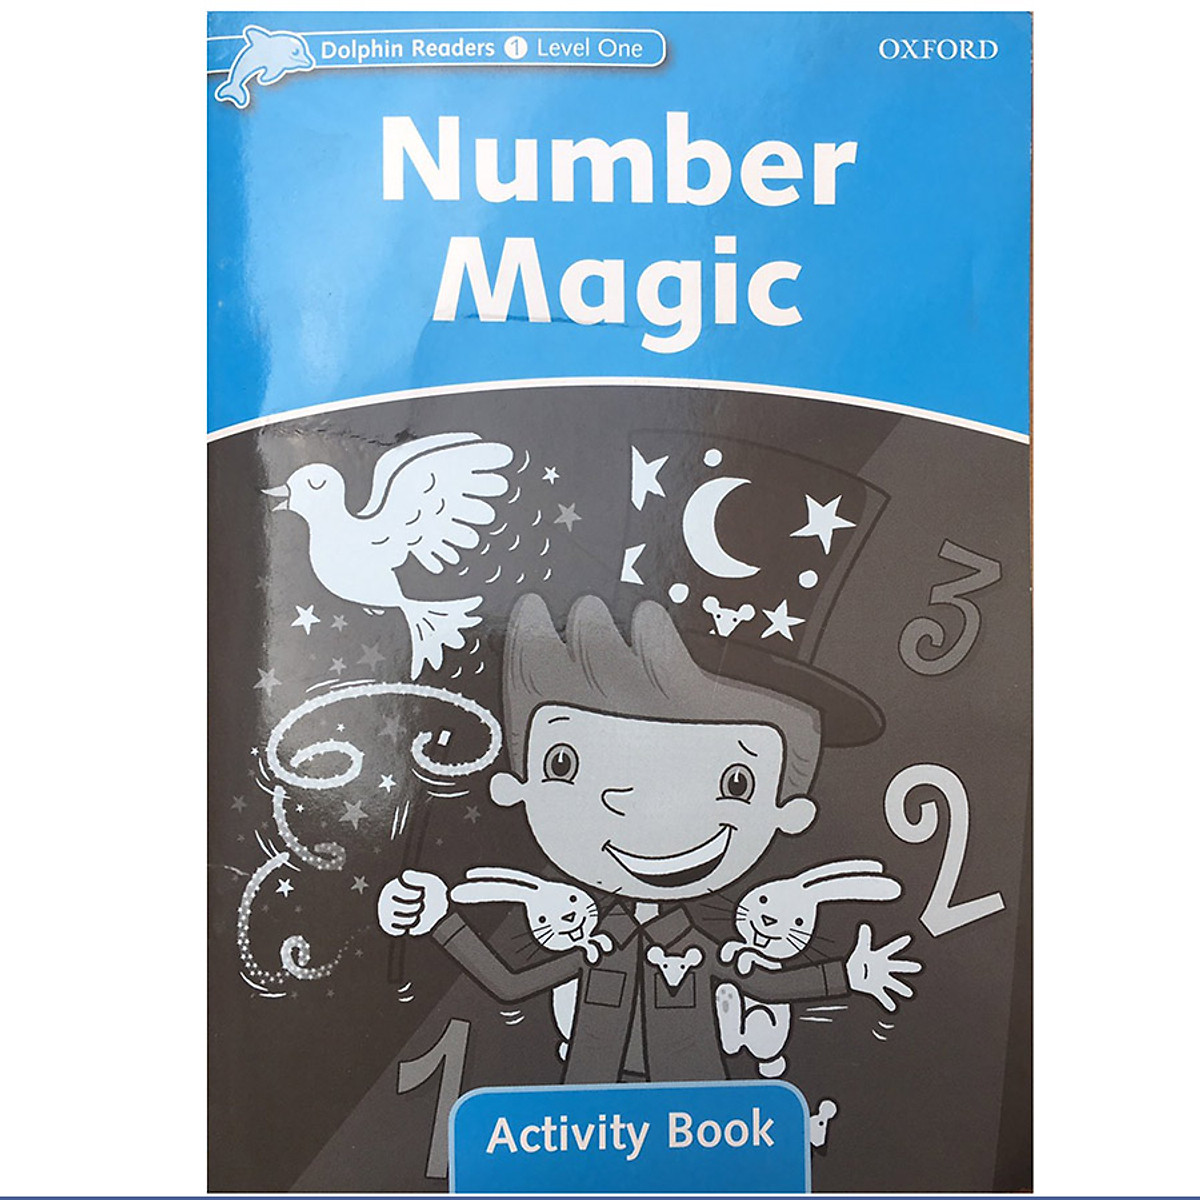 Dolphin Readers Level 1 Number Magic Activity Book